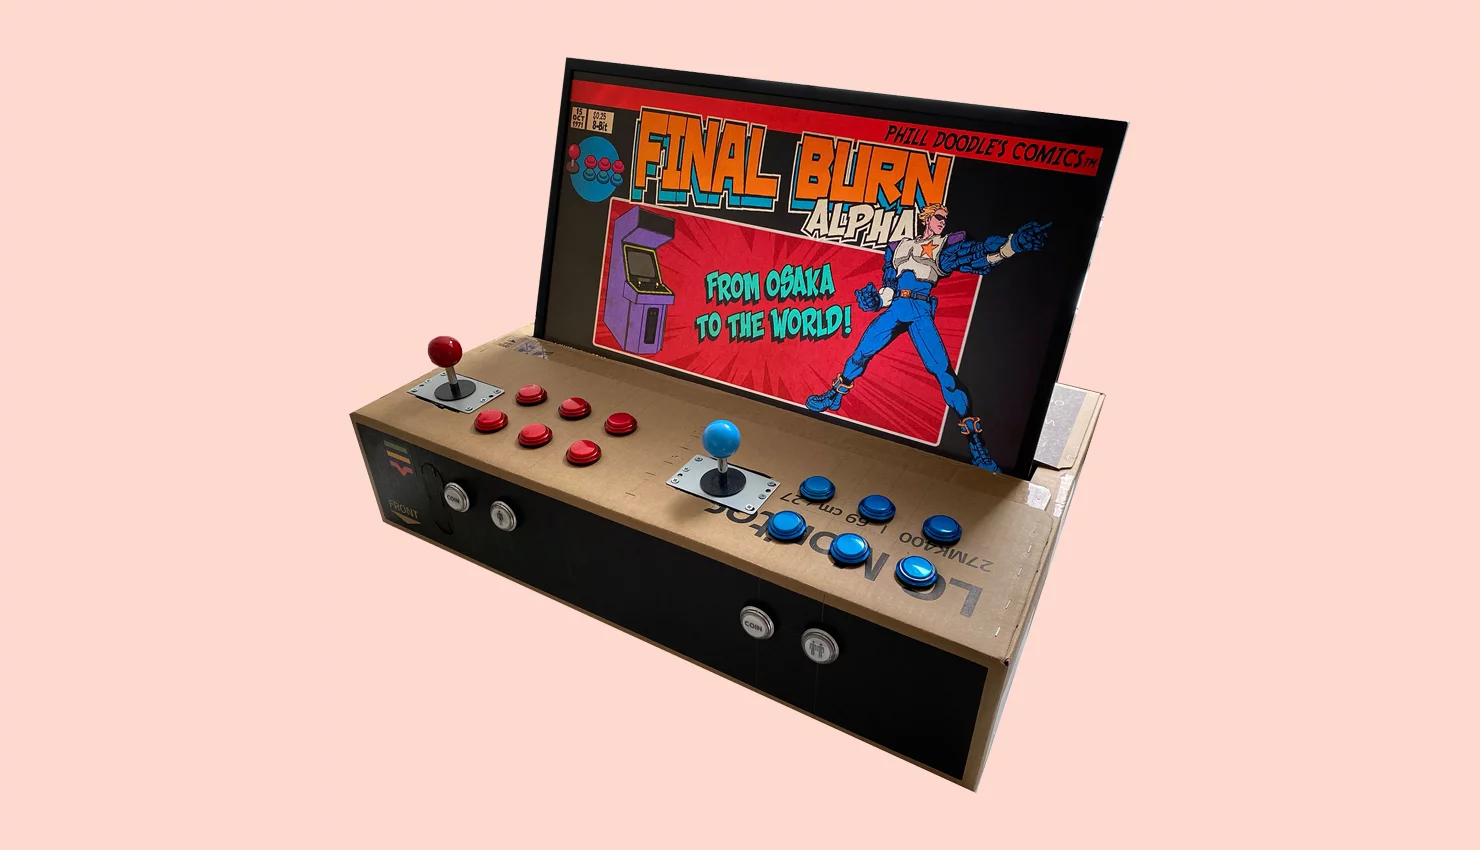 Build an arcade machine at home: Step-by-step guide